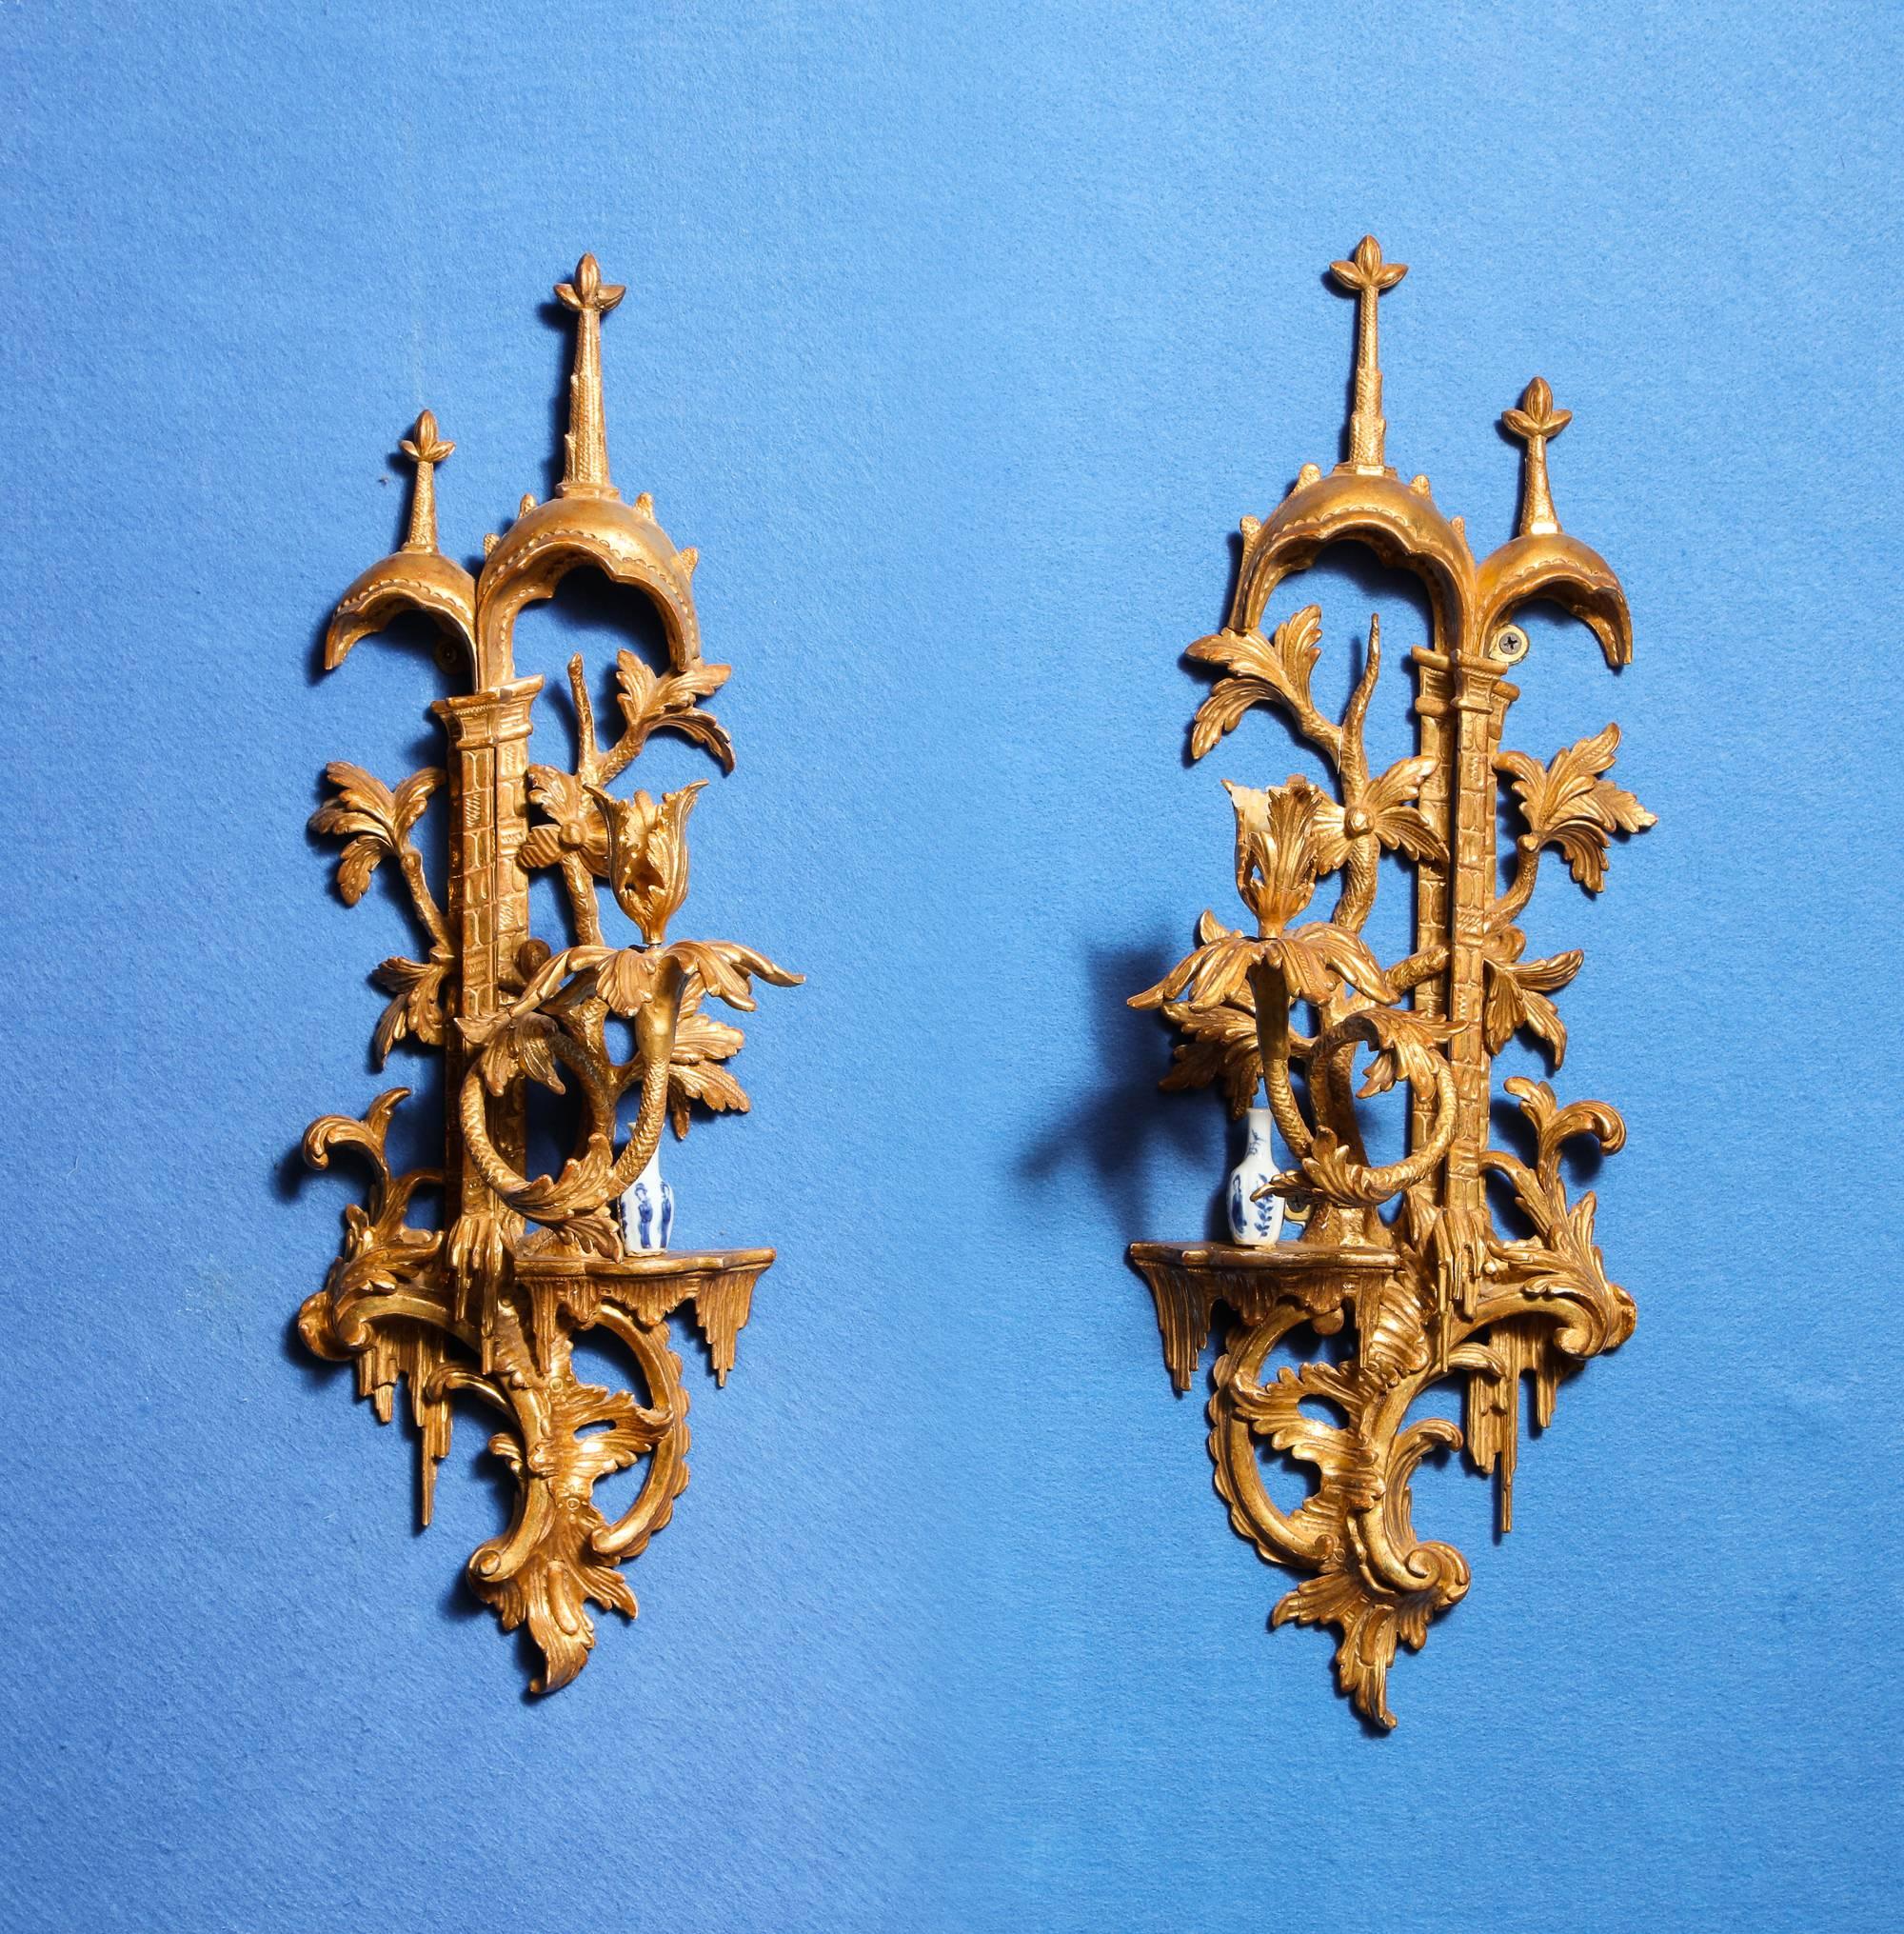 Rare and Very Fine Pair of Antique Chinese Chippendale Period Carved Gesso and Giltwood Wall Lights, with Chinoiserie double arched pagoda tops above twin reticulated pilasters with capitals and swirling leaf carved branches, each with a single